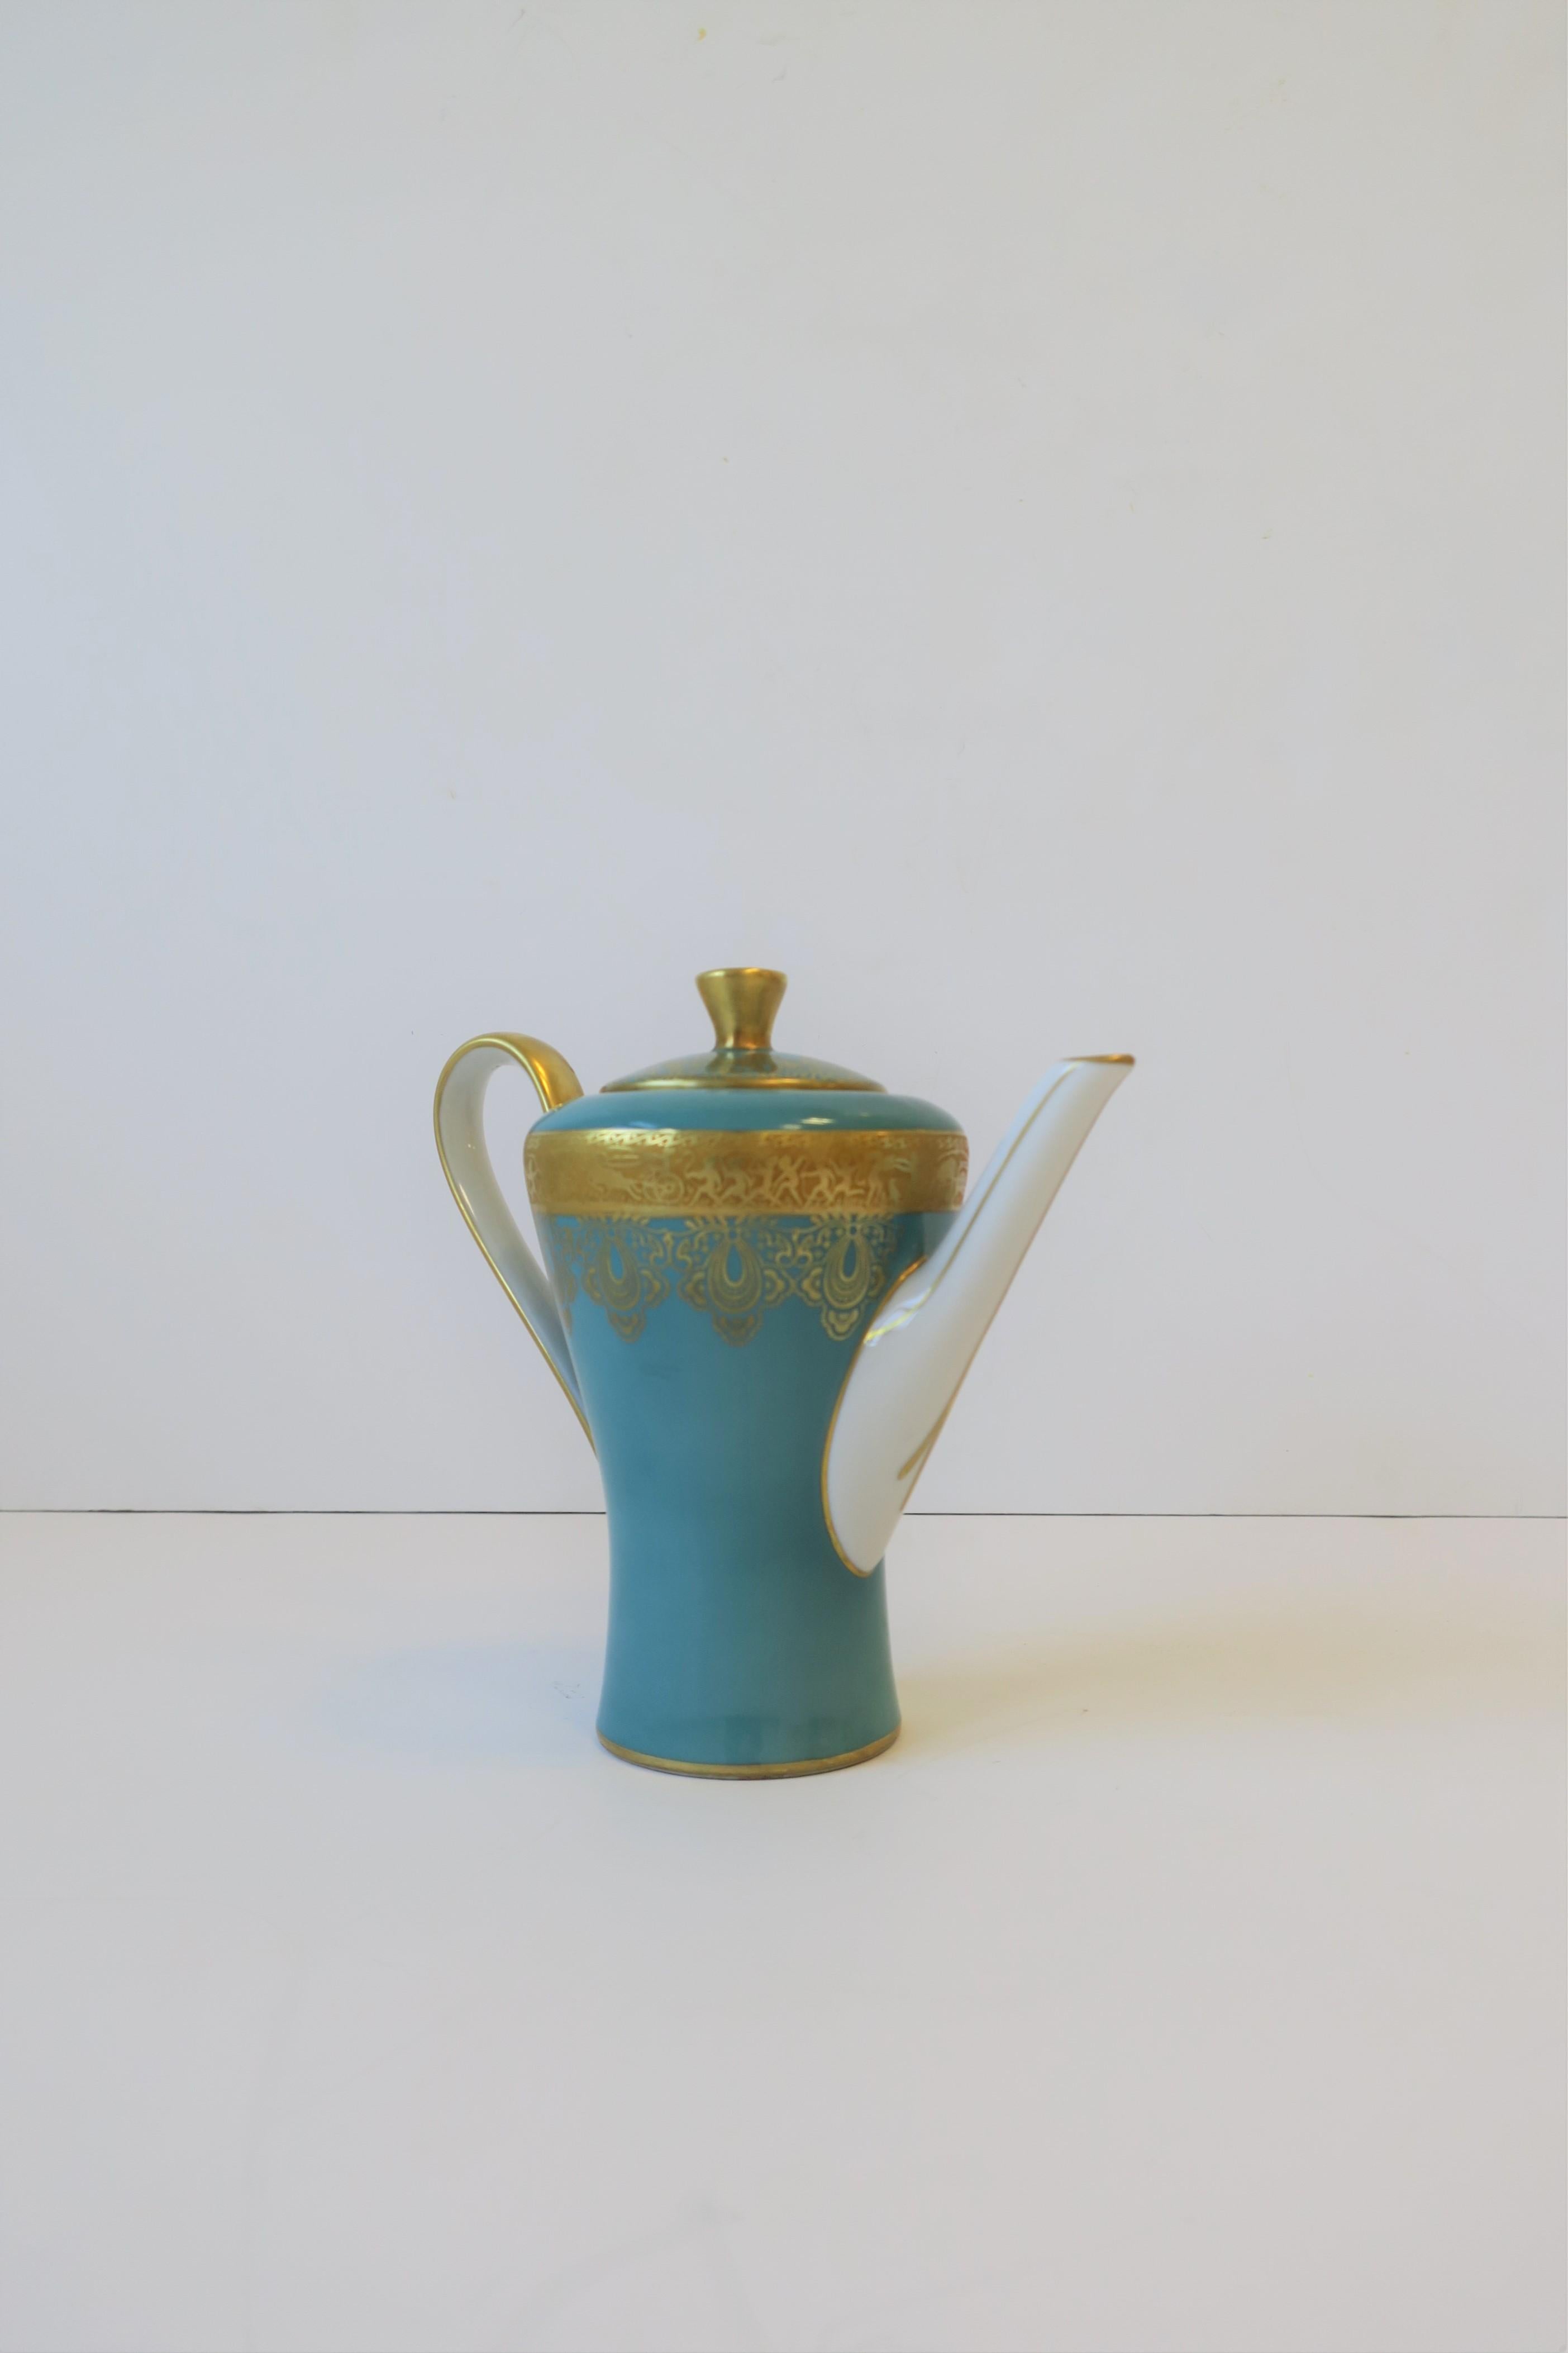 German Blue White and Gold Porcelain Tea or Coffee Pot 2